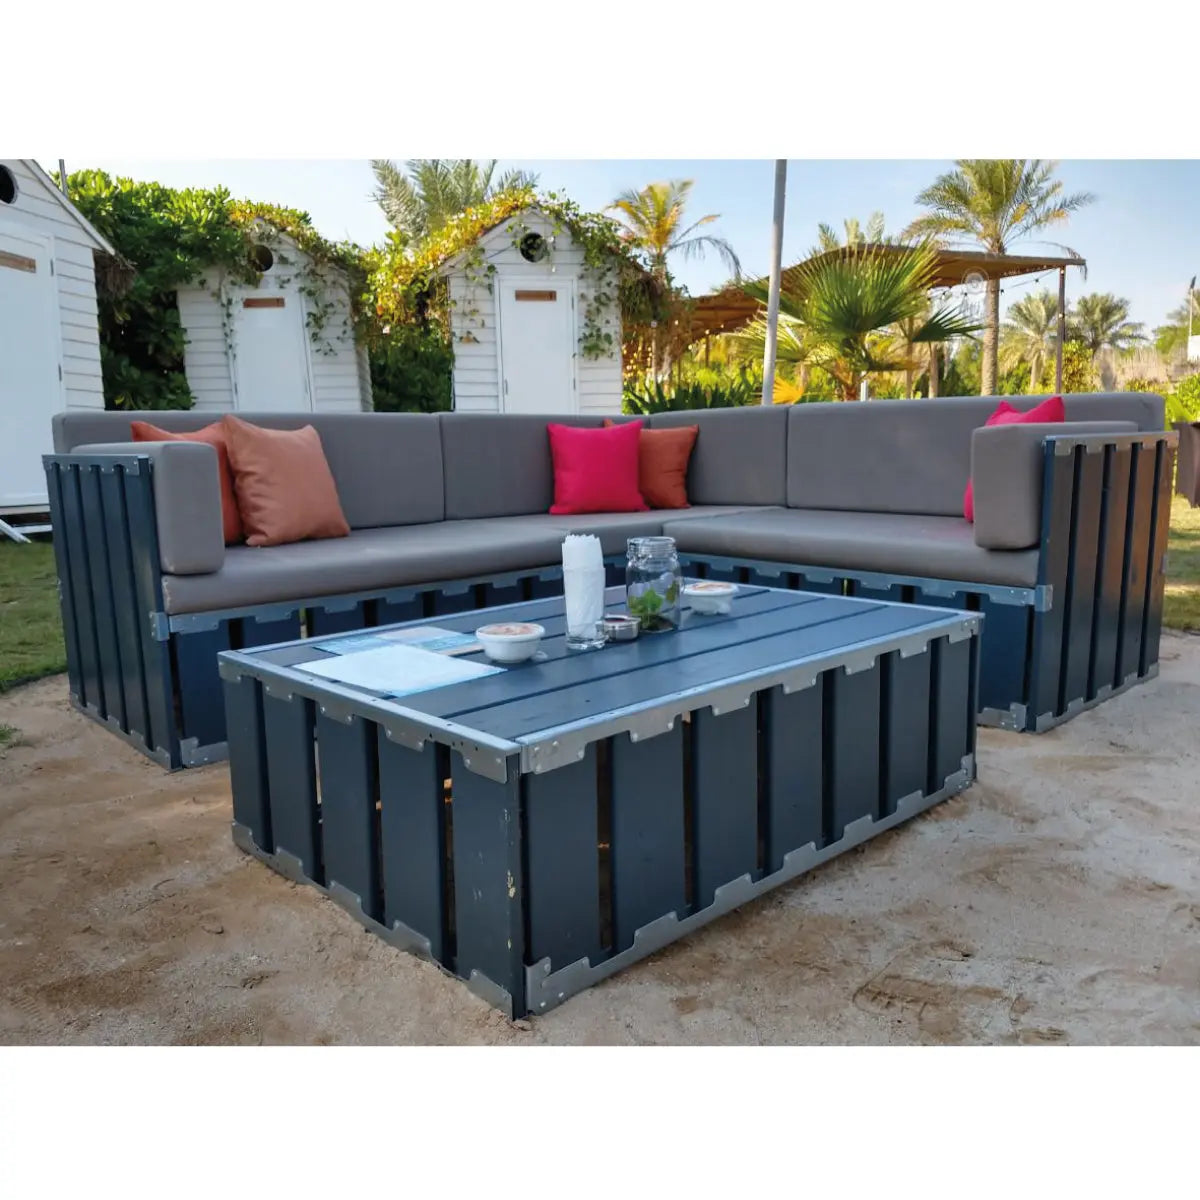 The lounge crate grey Desert River Rentals